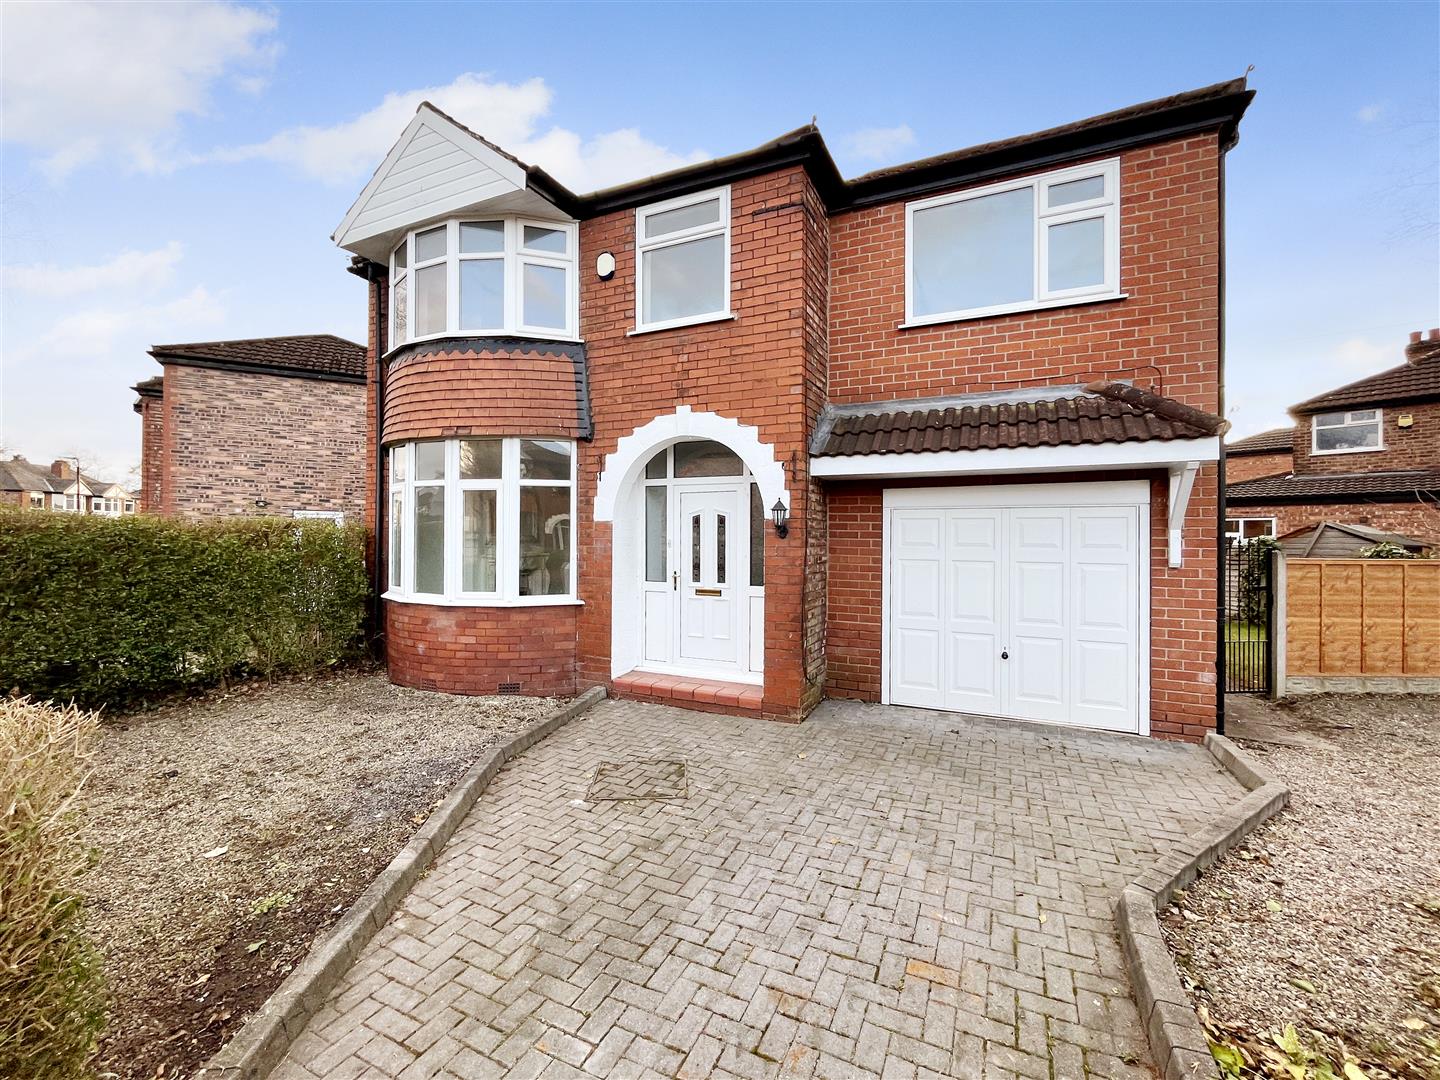 4 bed detached house for sale in Woodheys Drive, Sale - Property Image 1